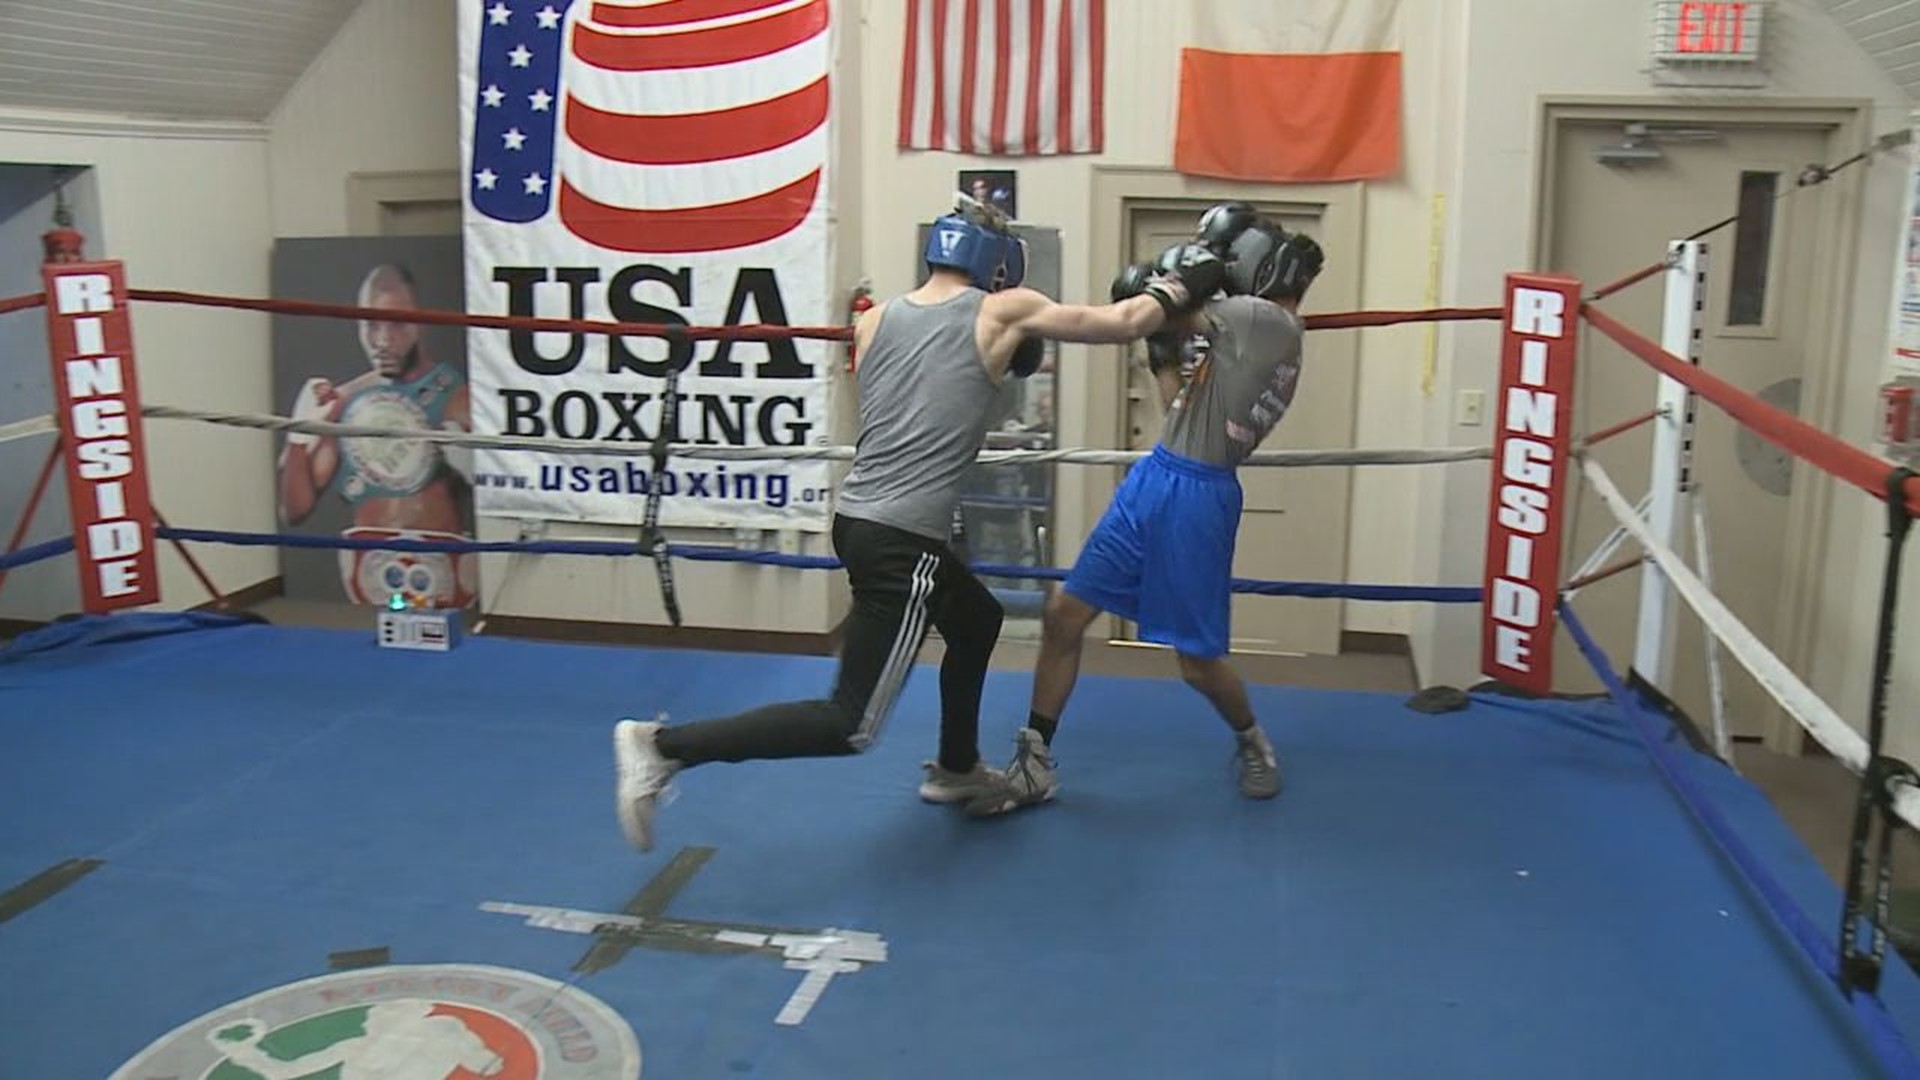 Local Boxing Community Takes a Hit During Coronavirus Pandemic